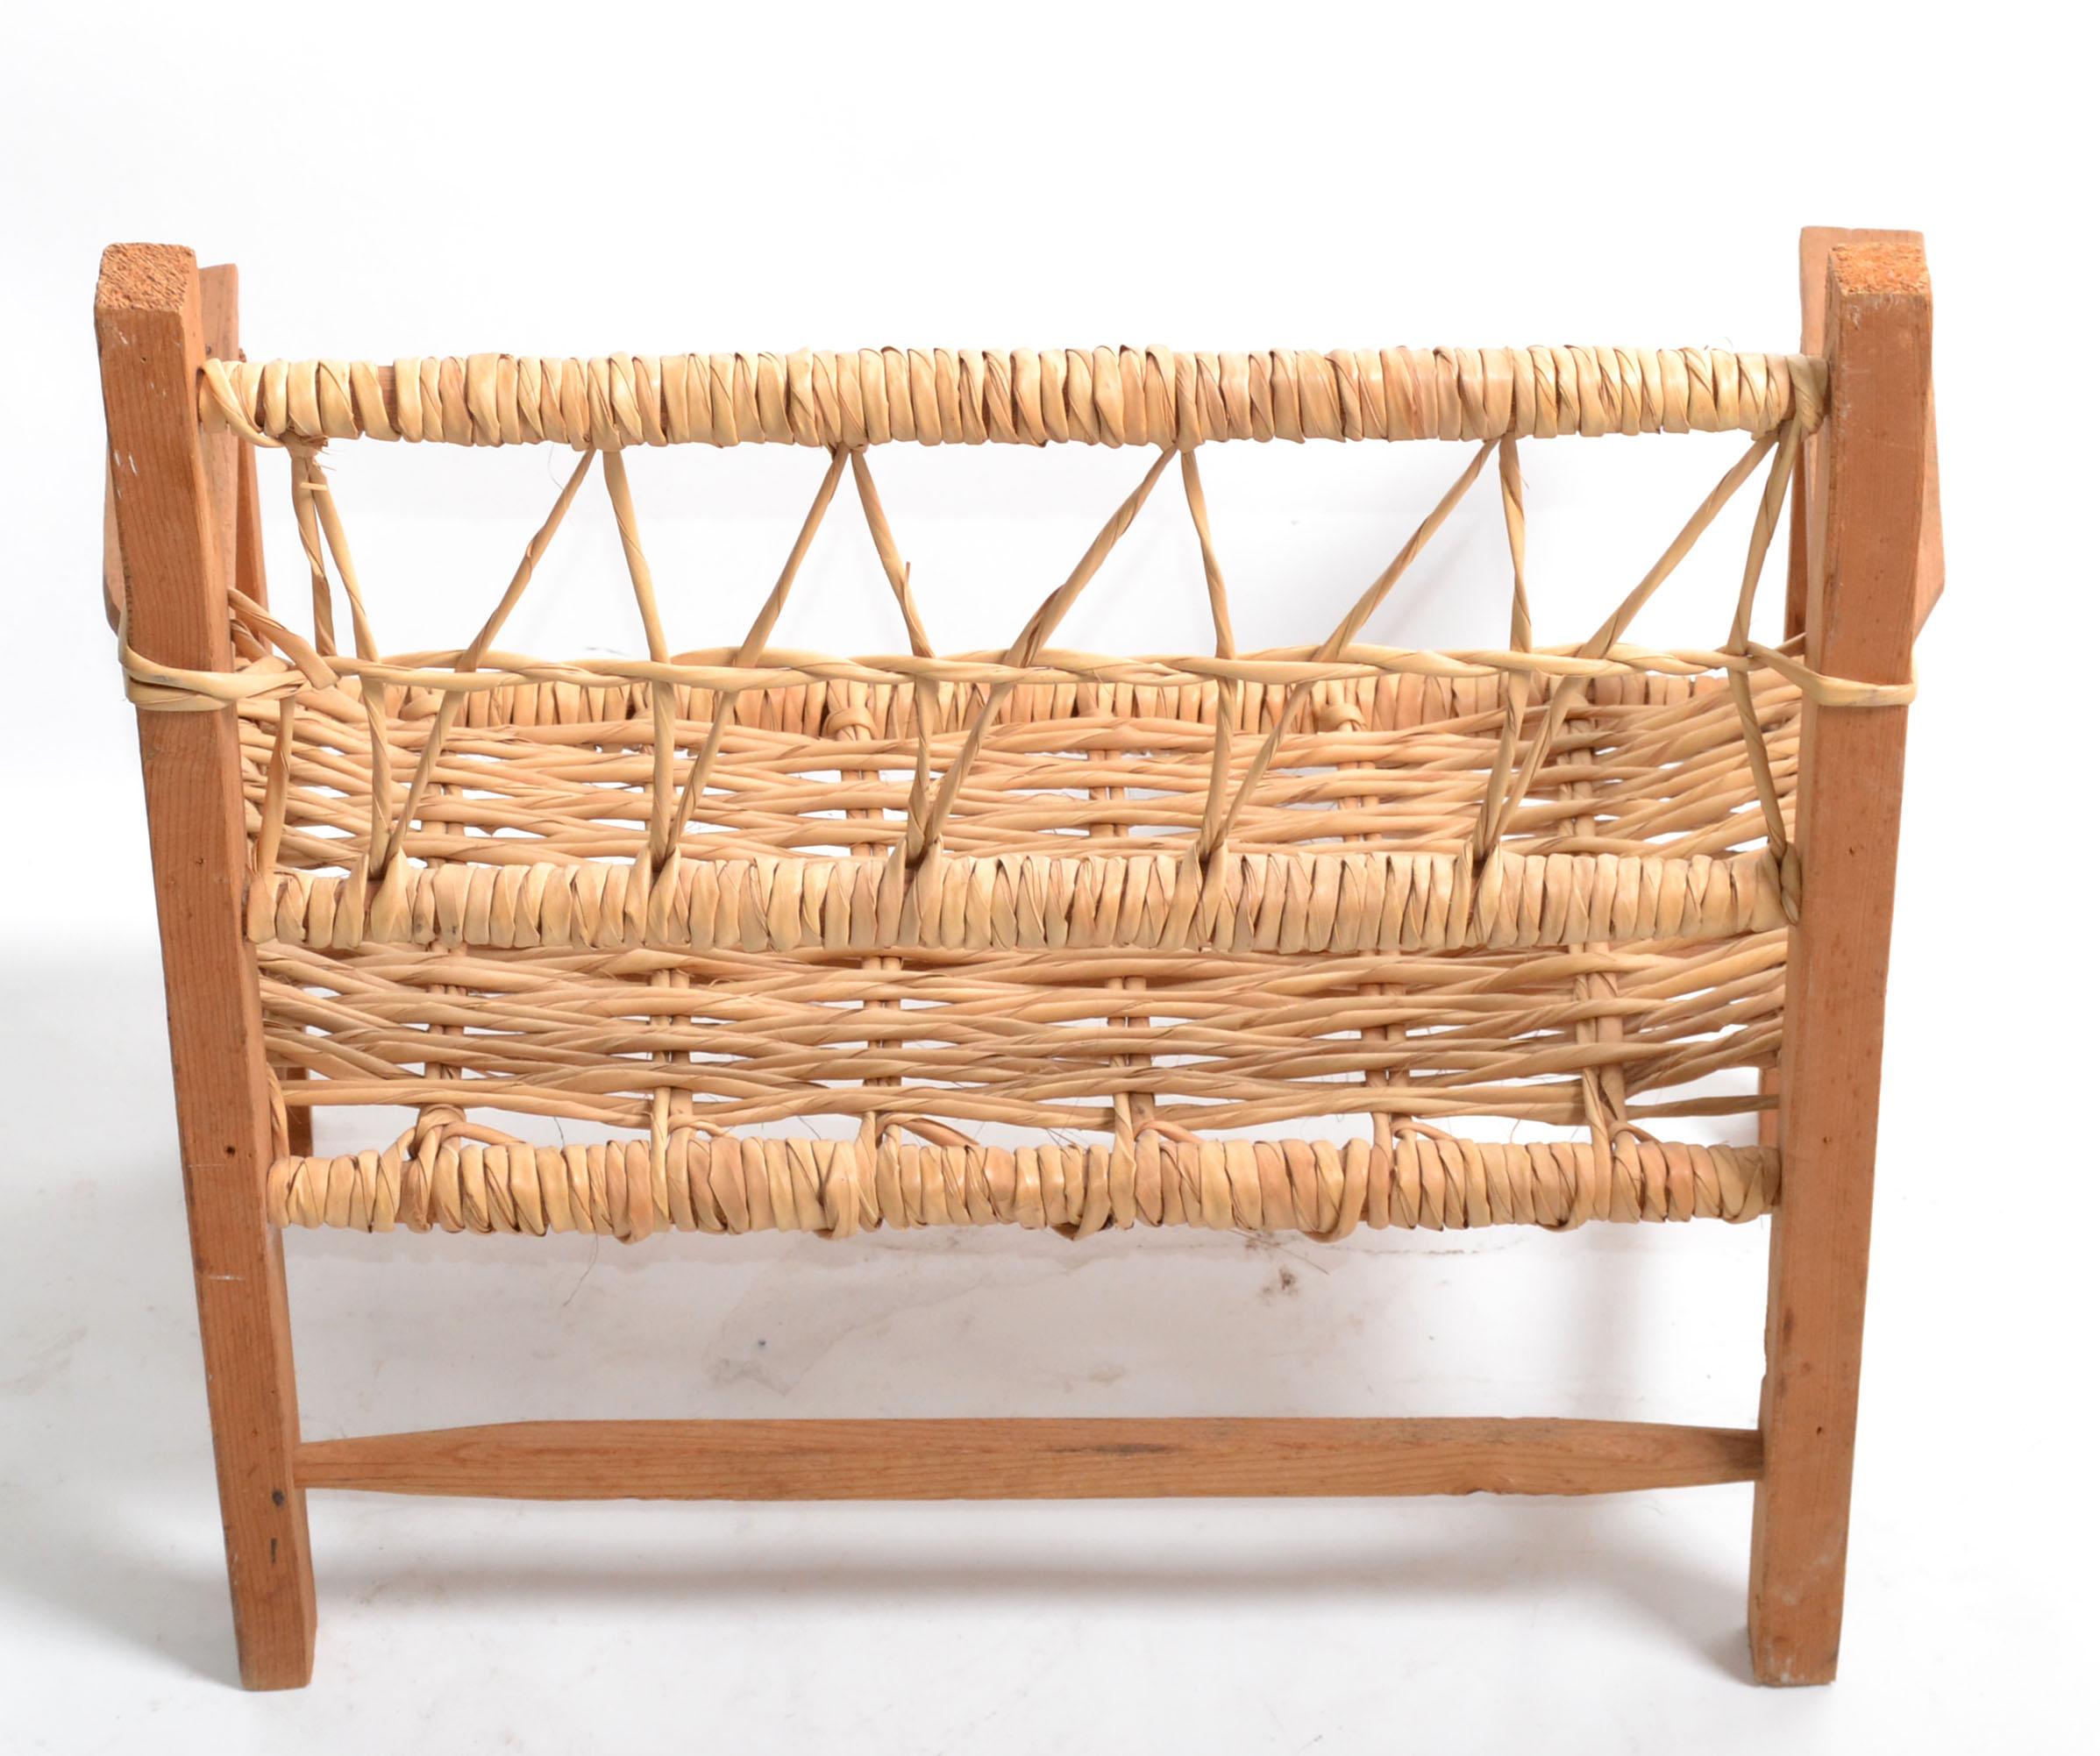 20th Century American Mid-Century Modern Woodworking & Cane Handwoven Doll, Teddy Bear Bench  For Sale